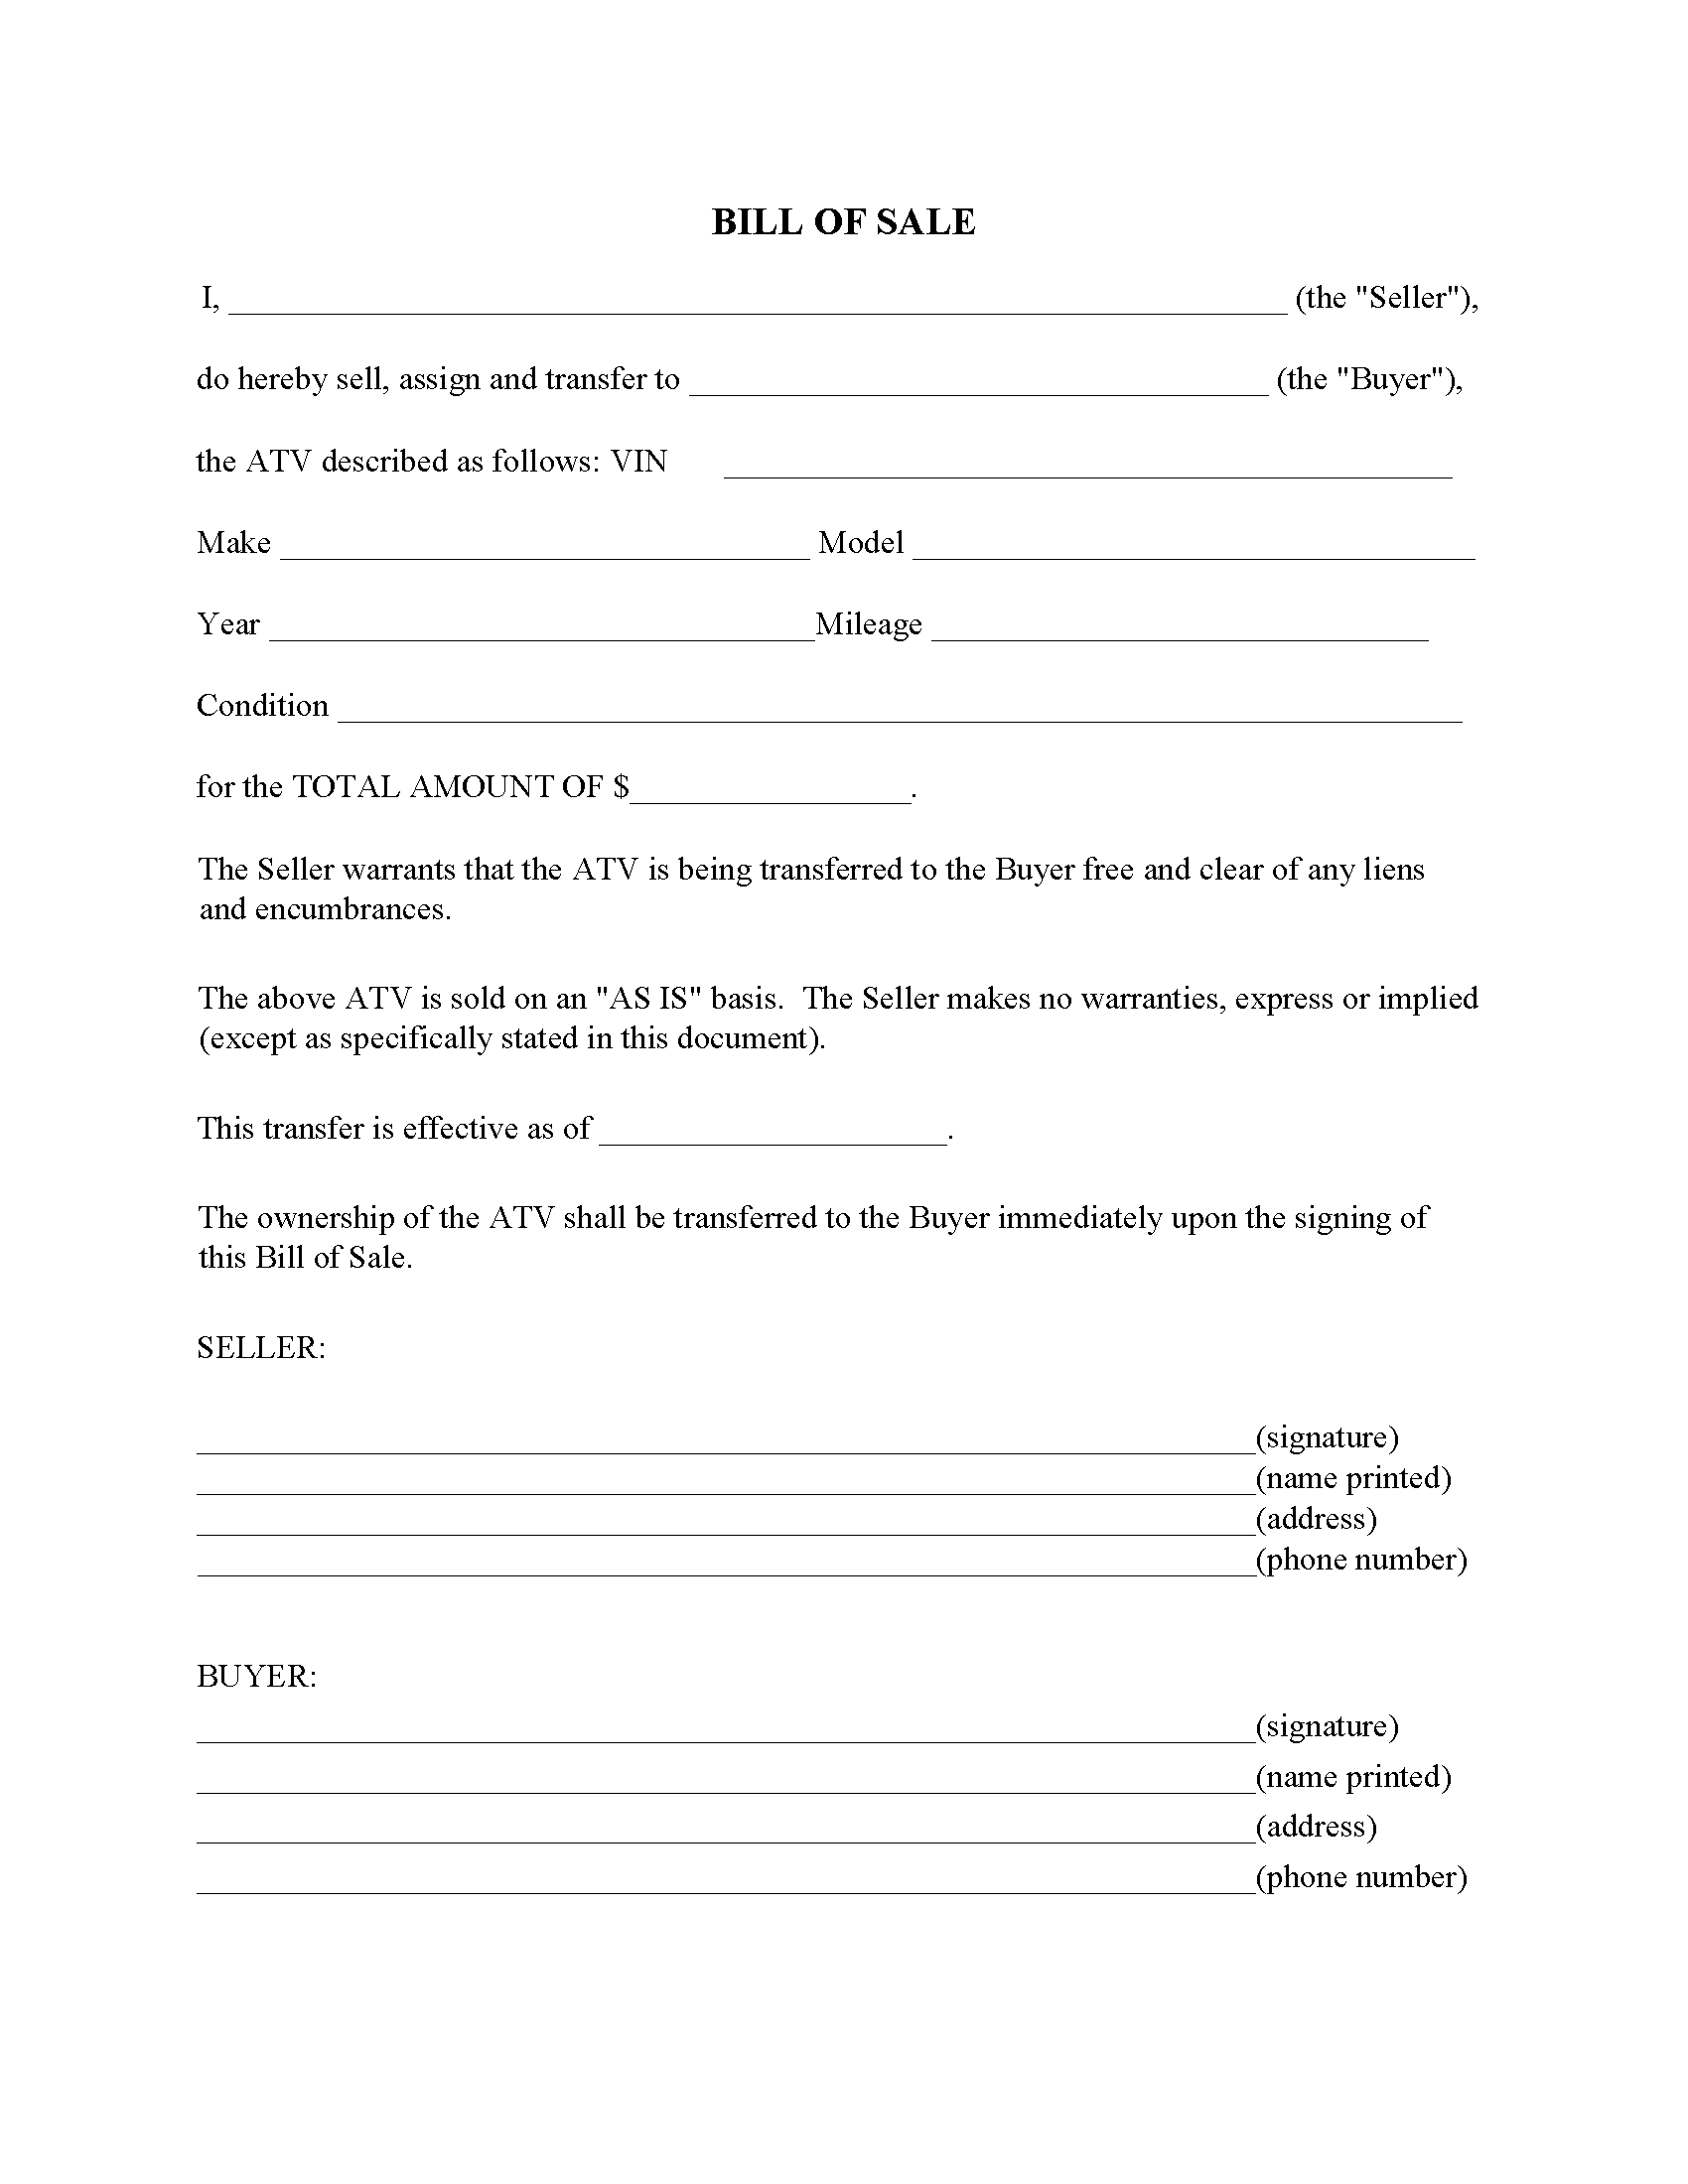 atv-bill-of-sale-form-free-printable-legal-forms